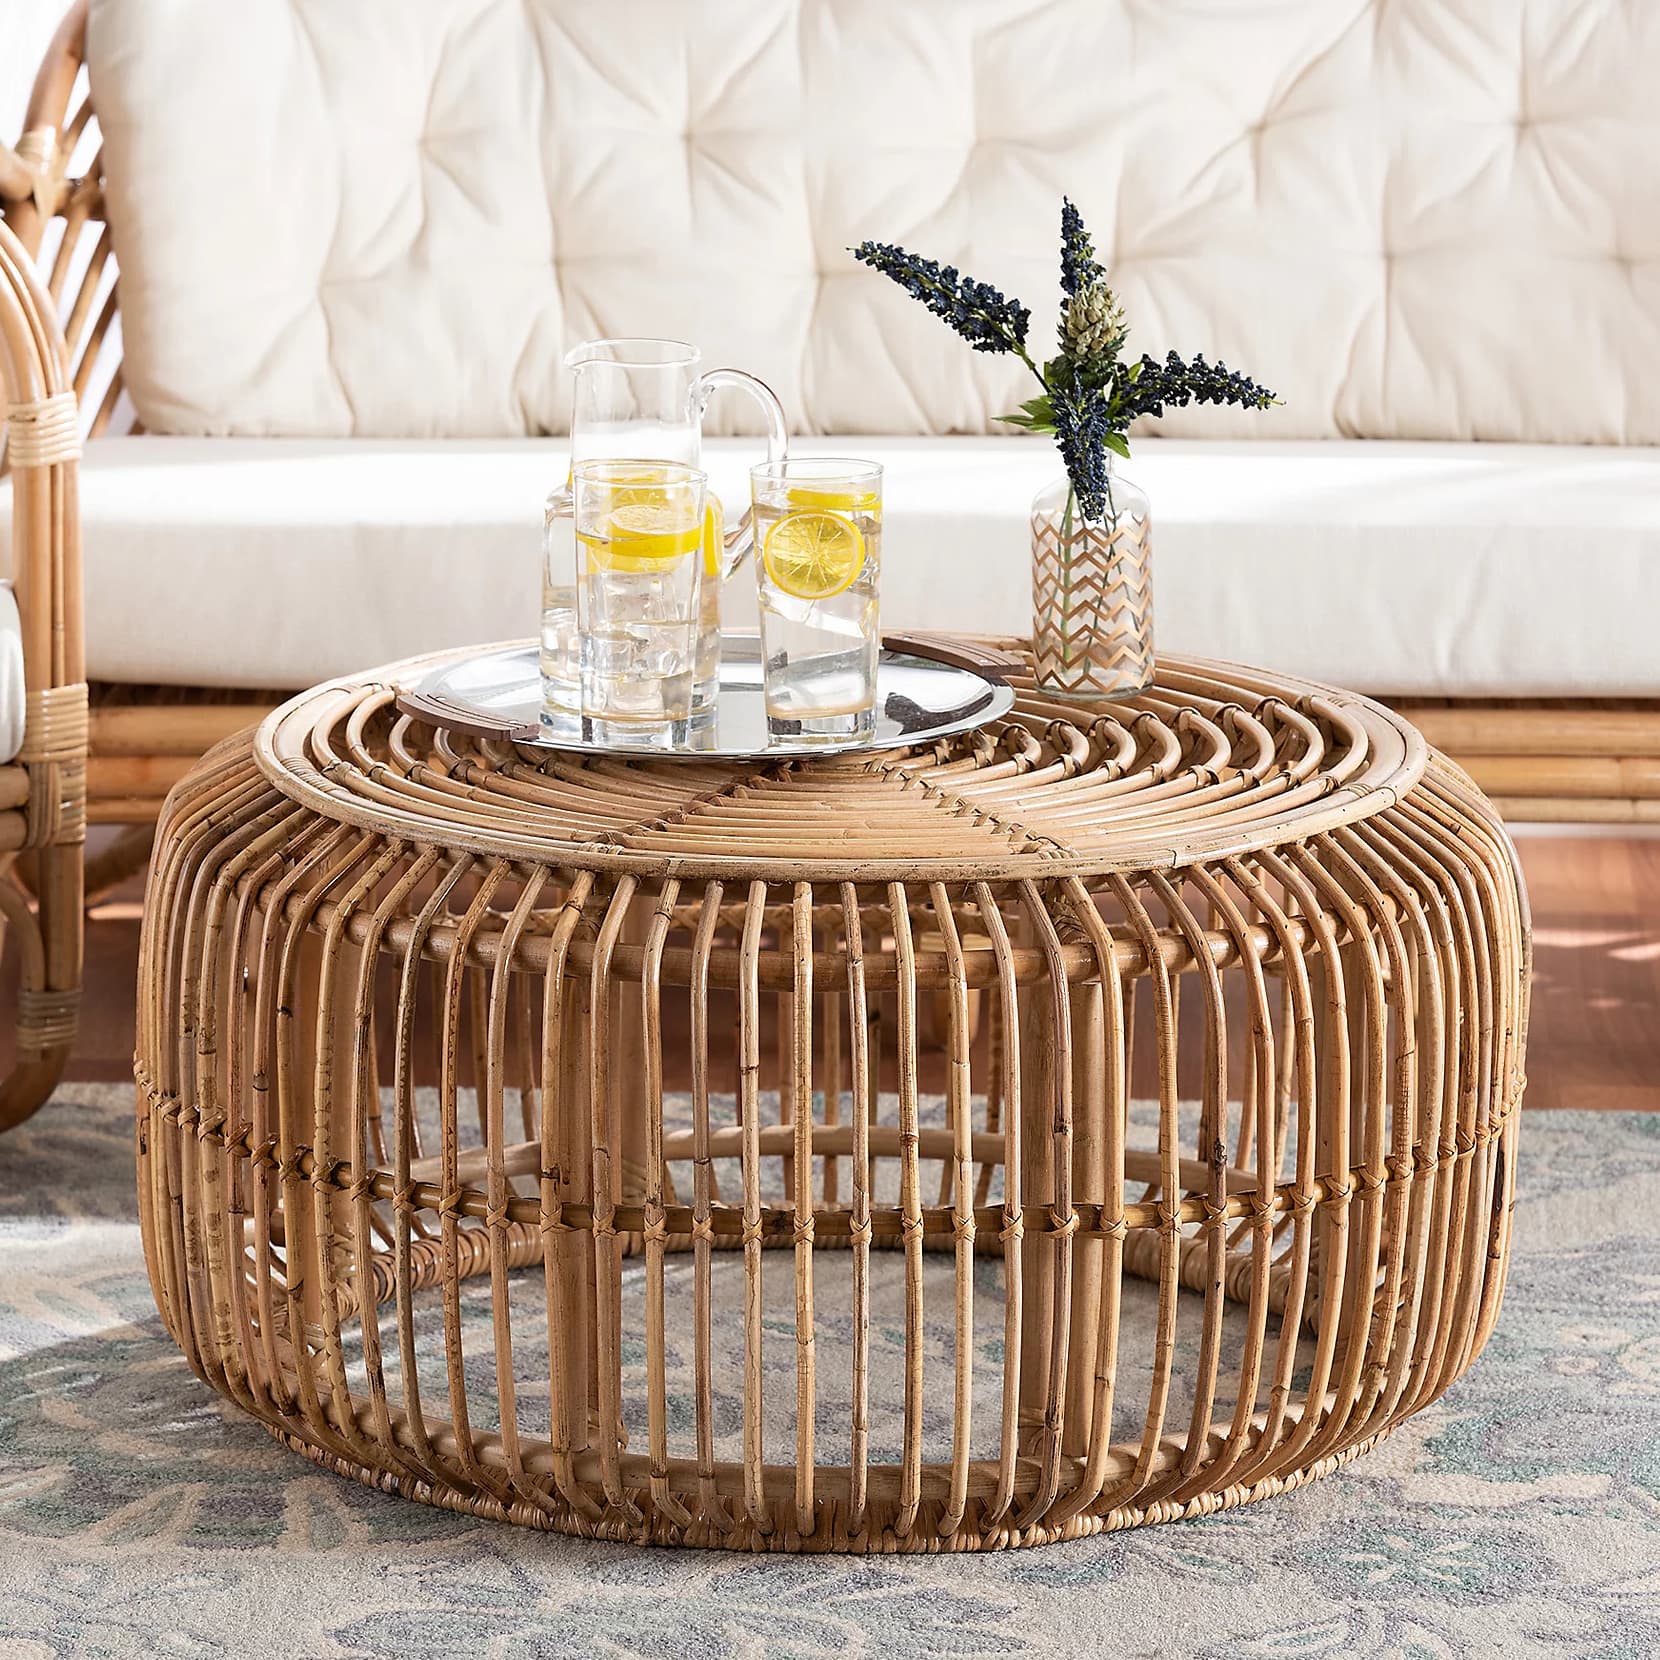 http://cdn.apartmenttherapy.info/image/upload/v1680042525/gen-workflow/product-database/aliane-natural-brown-antiqued-rattan-coffee-table-qvc.jpg